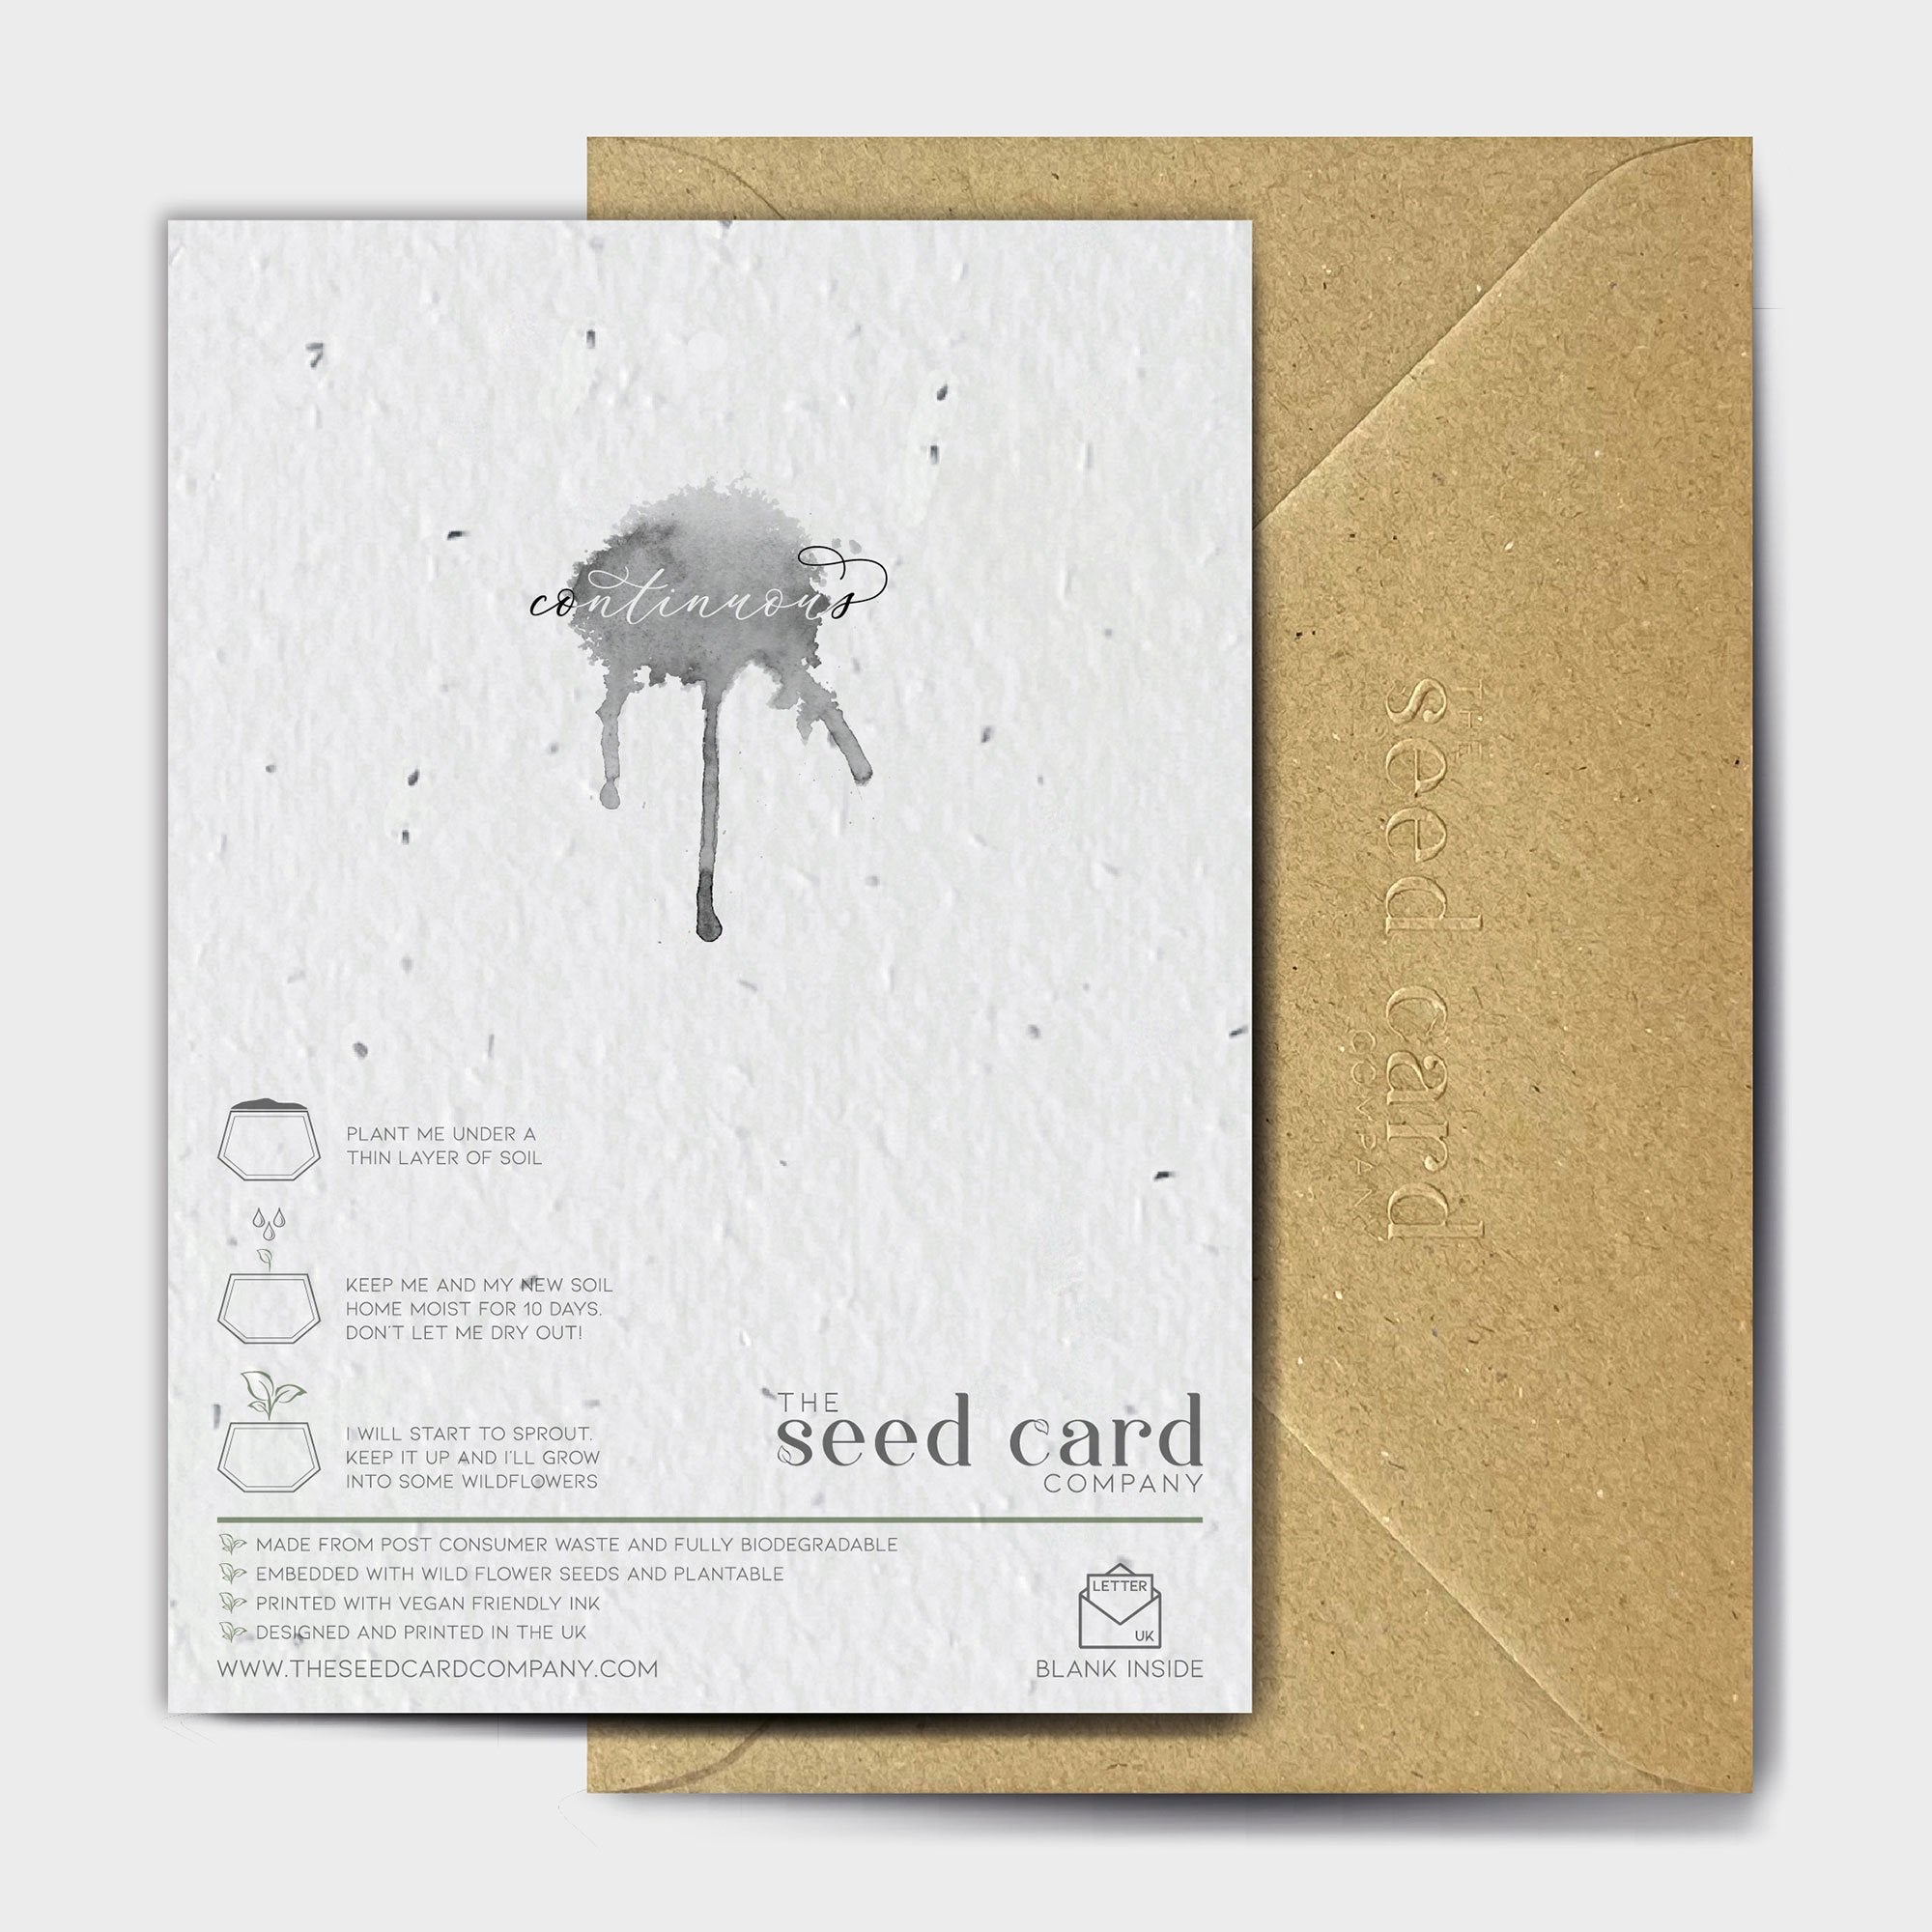 Shop online Spring Is Here - 100% biodegradable seed-embedded cards Shop -The Seed Card Company